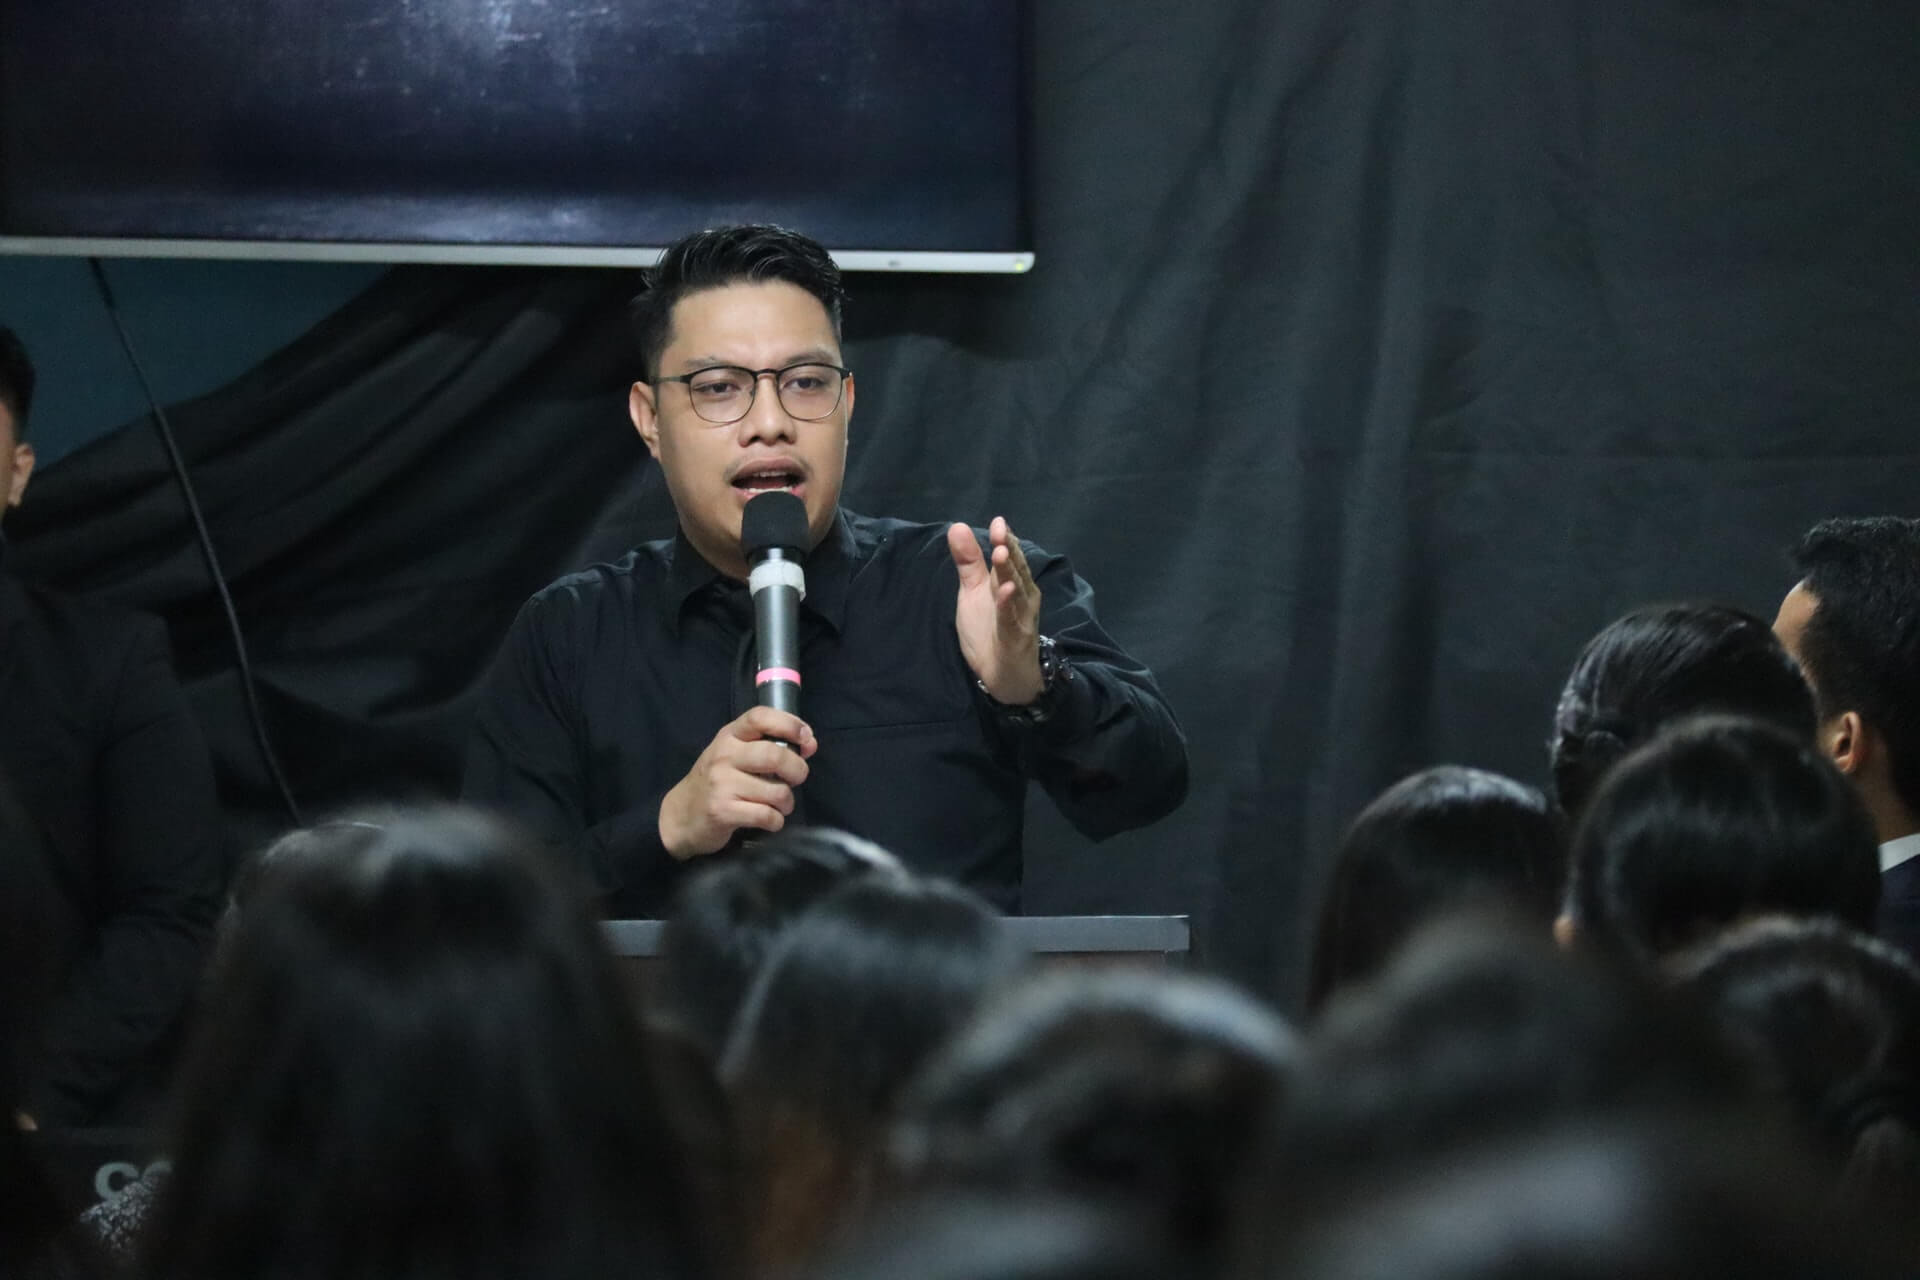 Renown speaker in a seminar to students